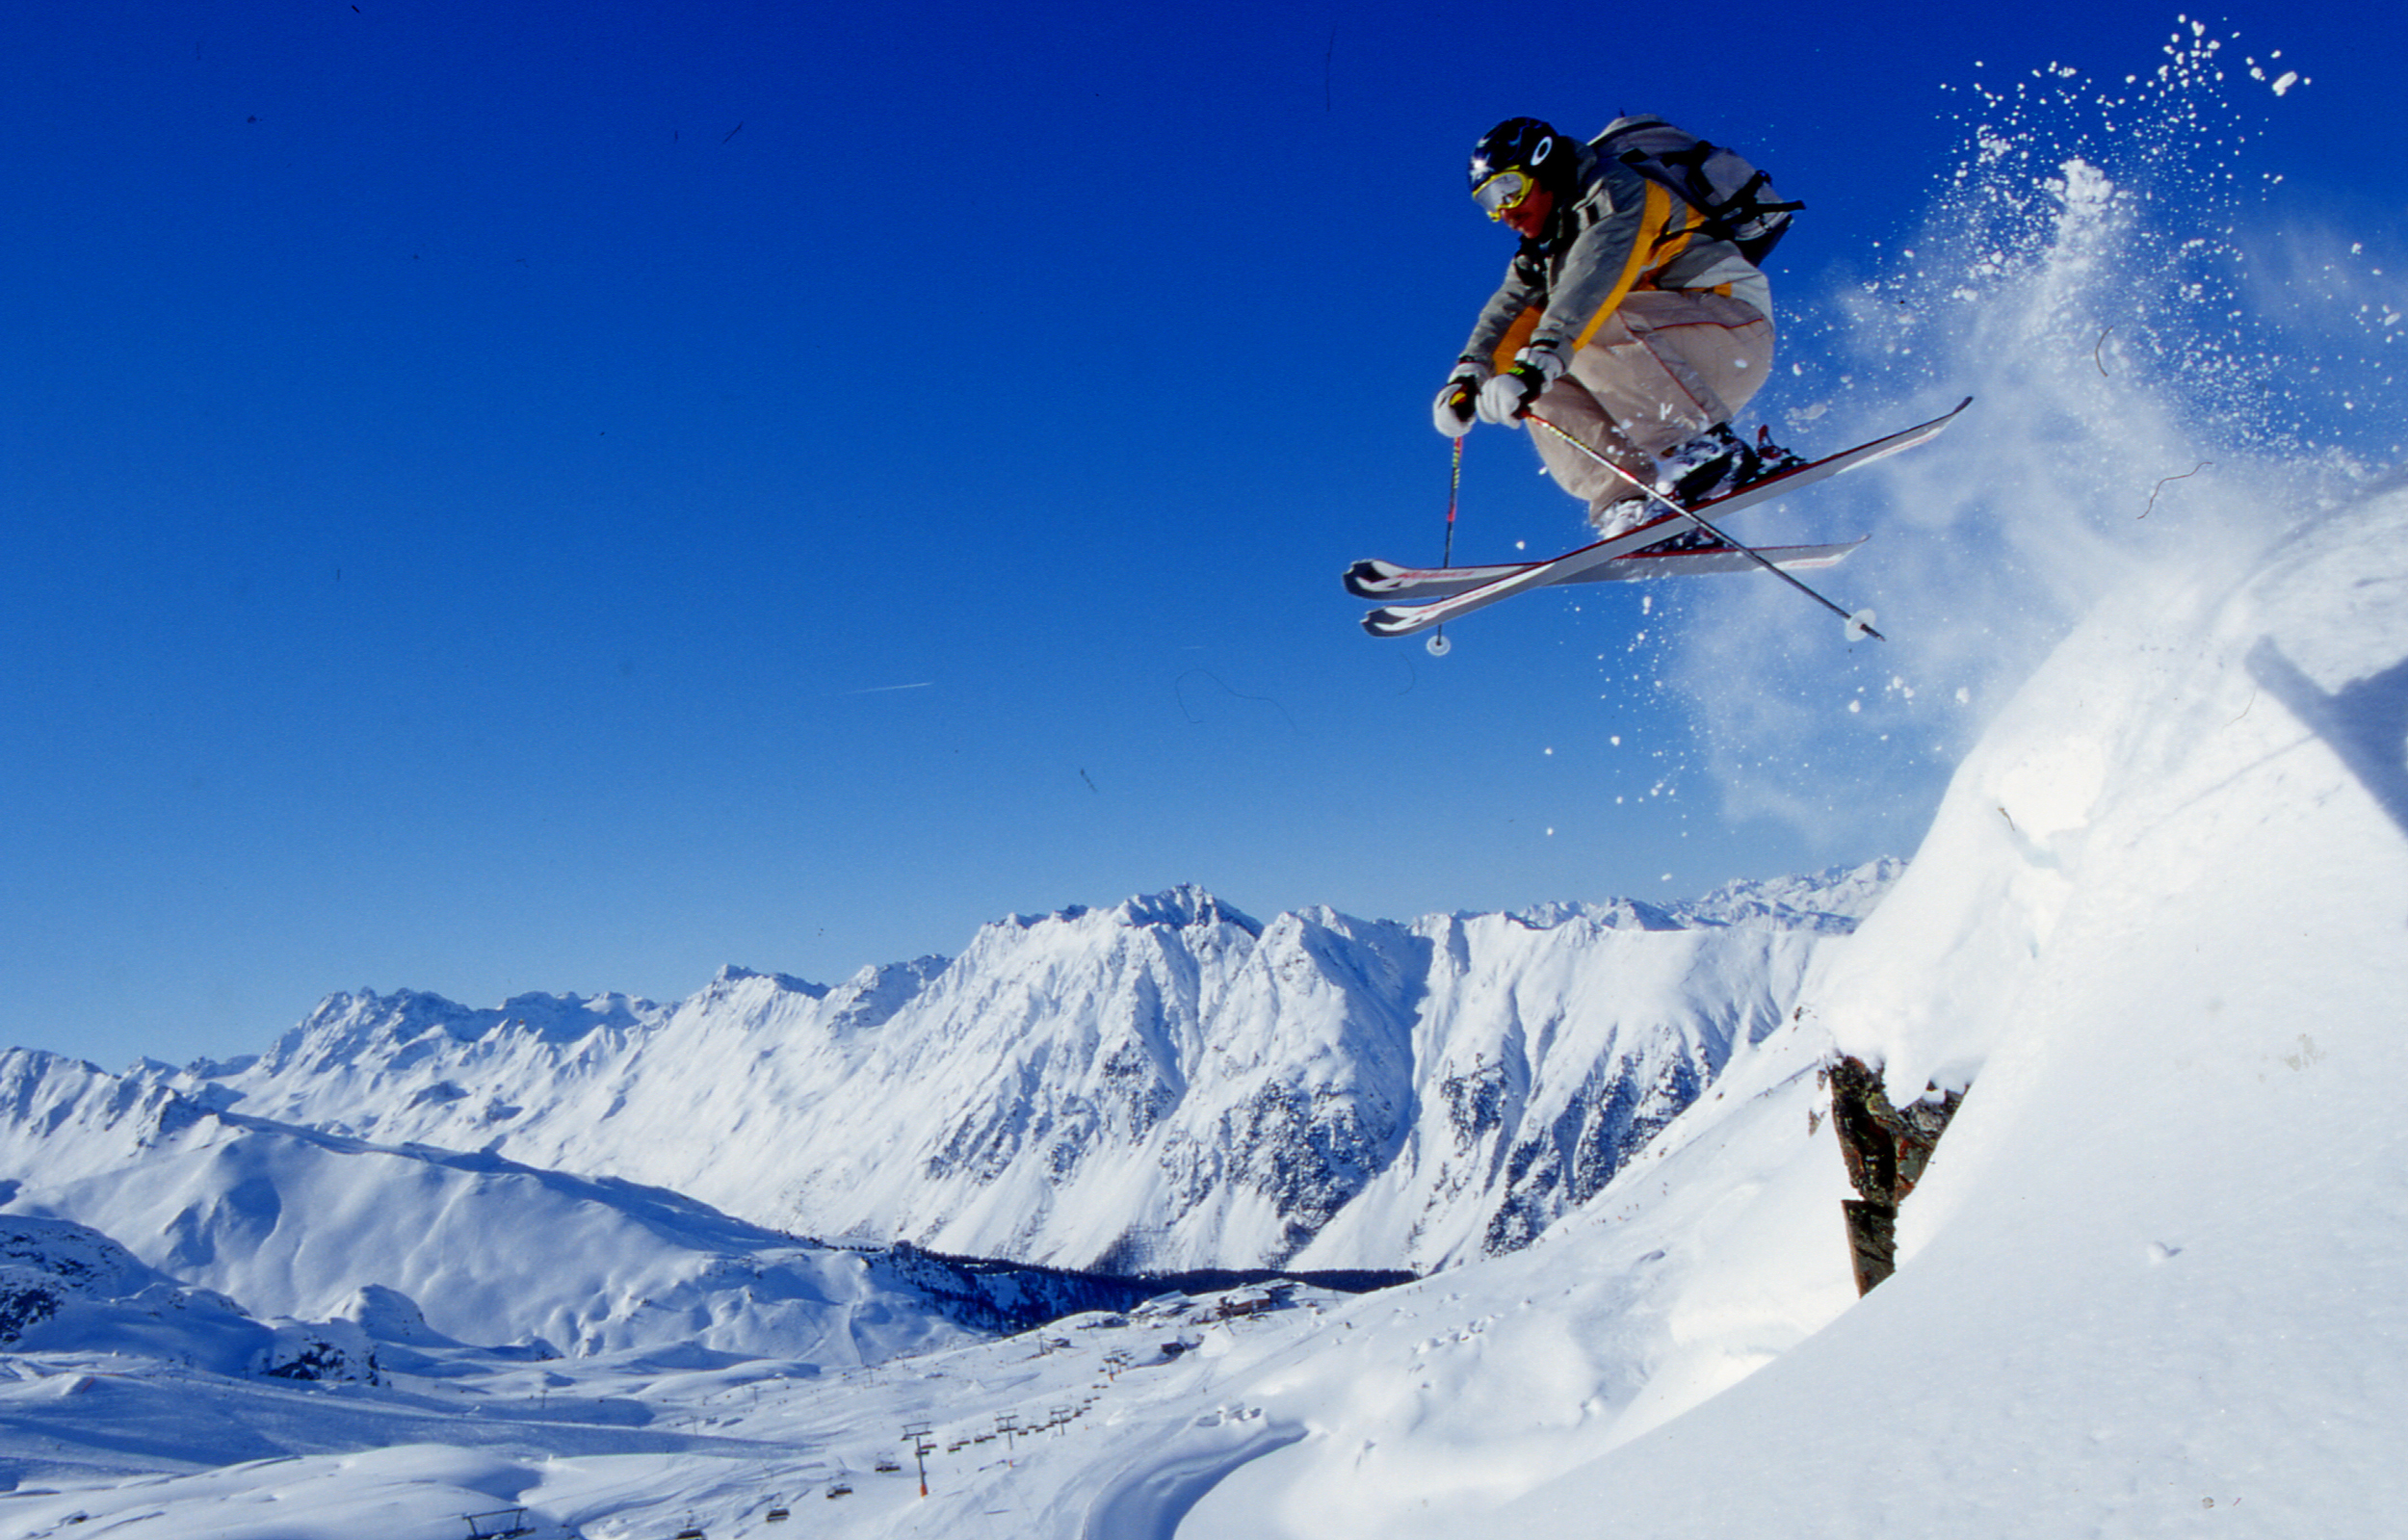 Amazing Skiing Pictures & Backgrounds